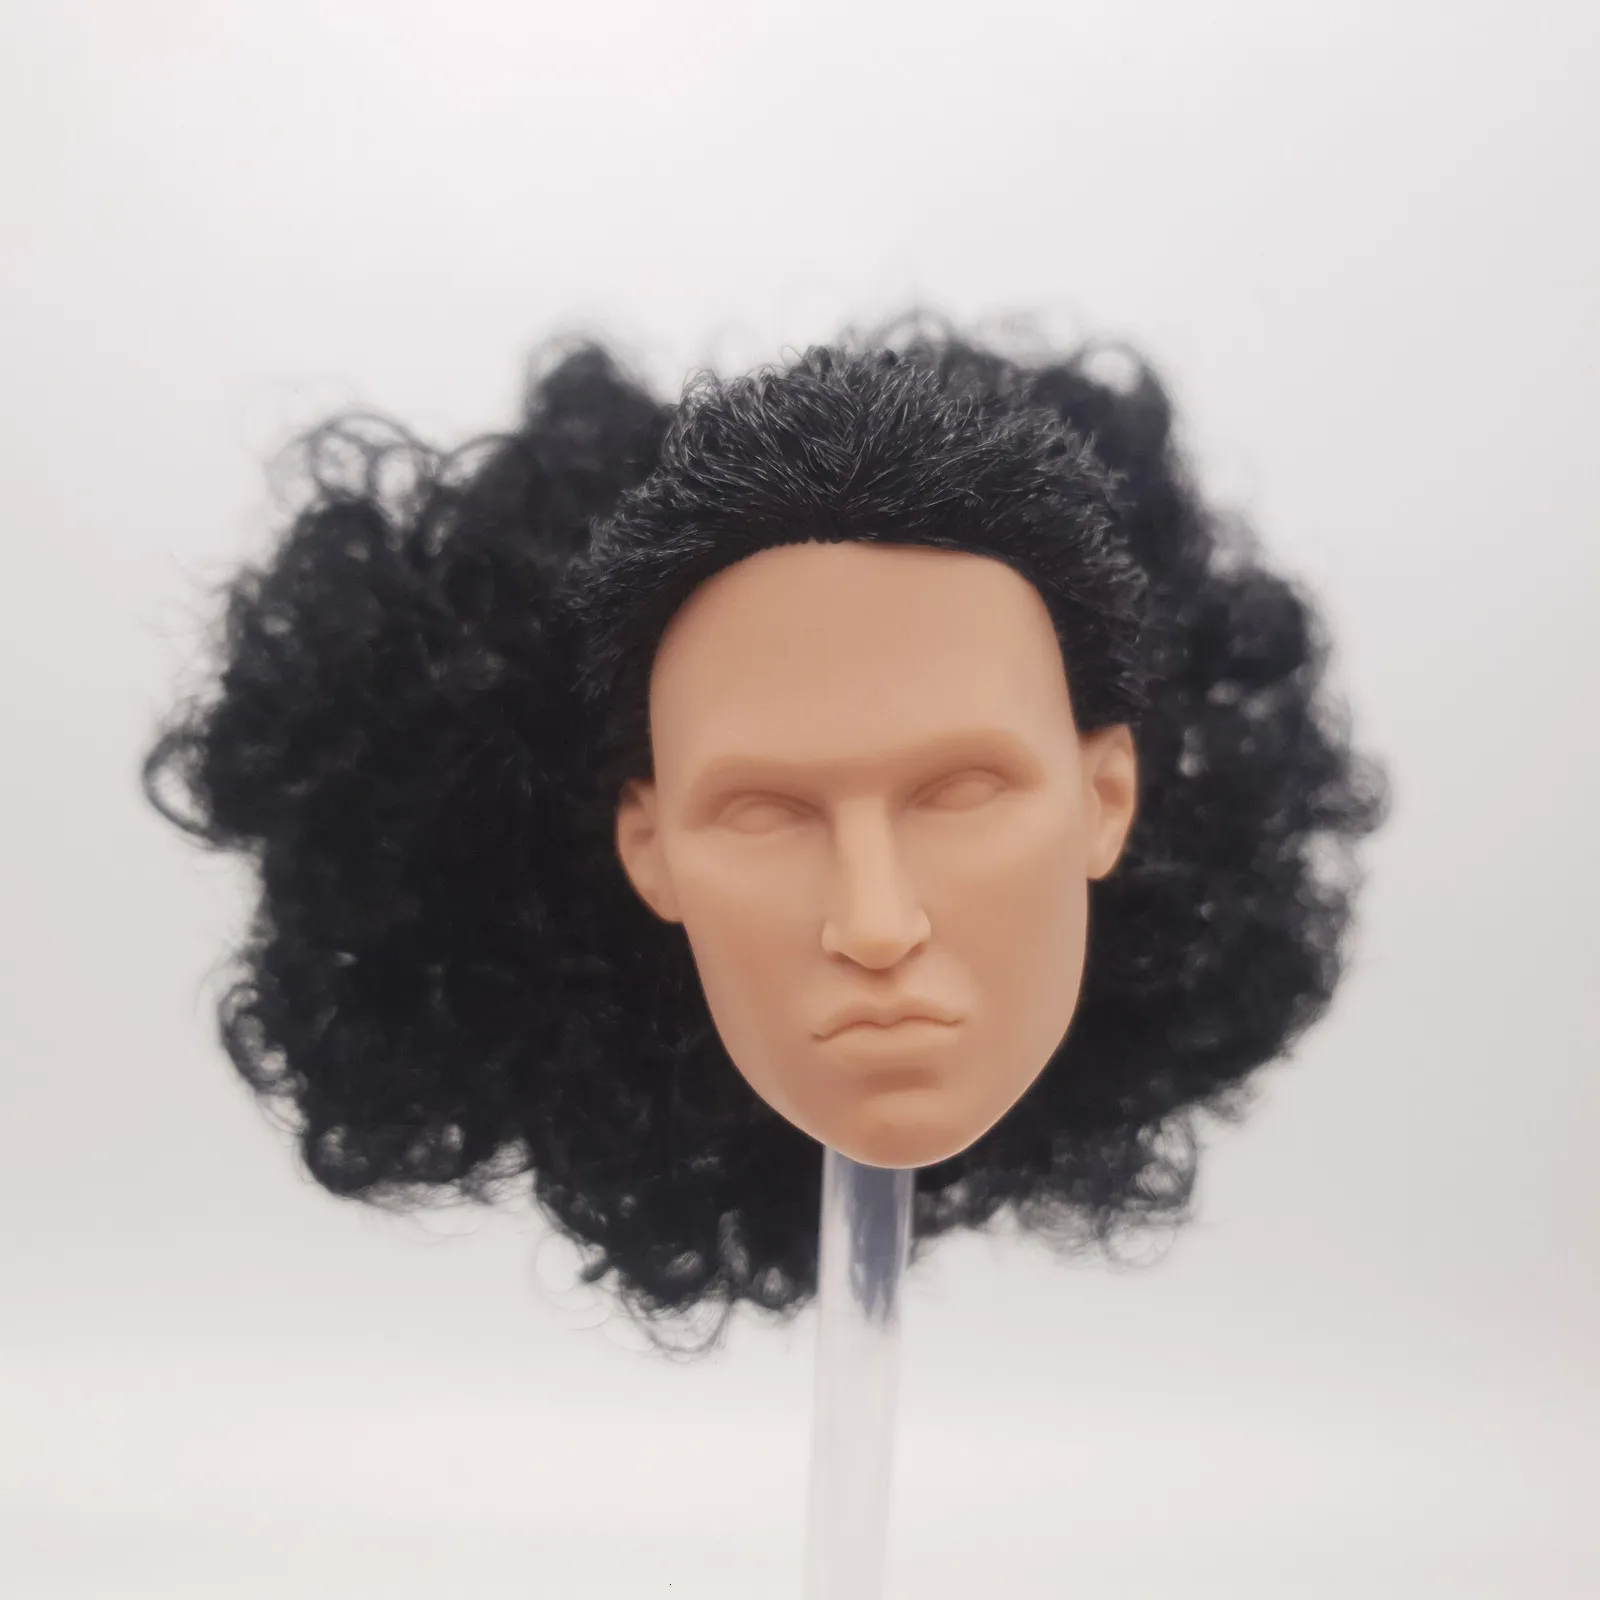 Куклы мода Royalty Homme Declan Fr White Skin Black Curly Hairs 16 Scale Uncainted Doll Head 230719